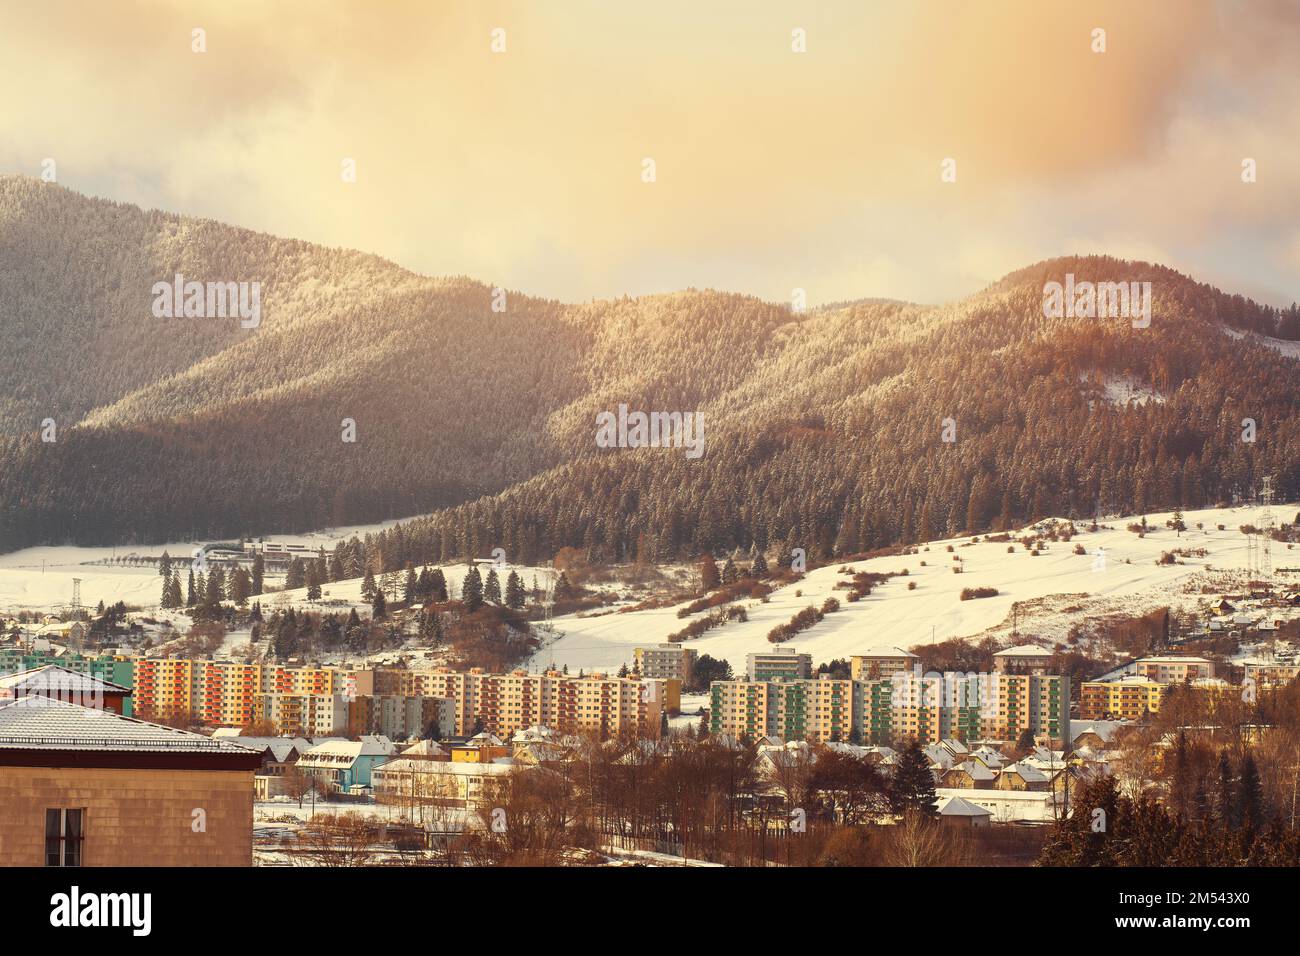 View of a town in winter season.Beautiful snowy mountains in background. Stock Photo